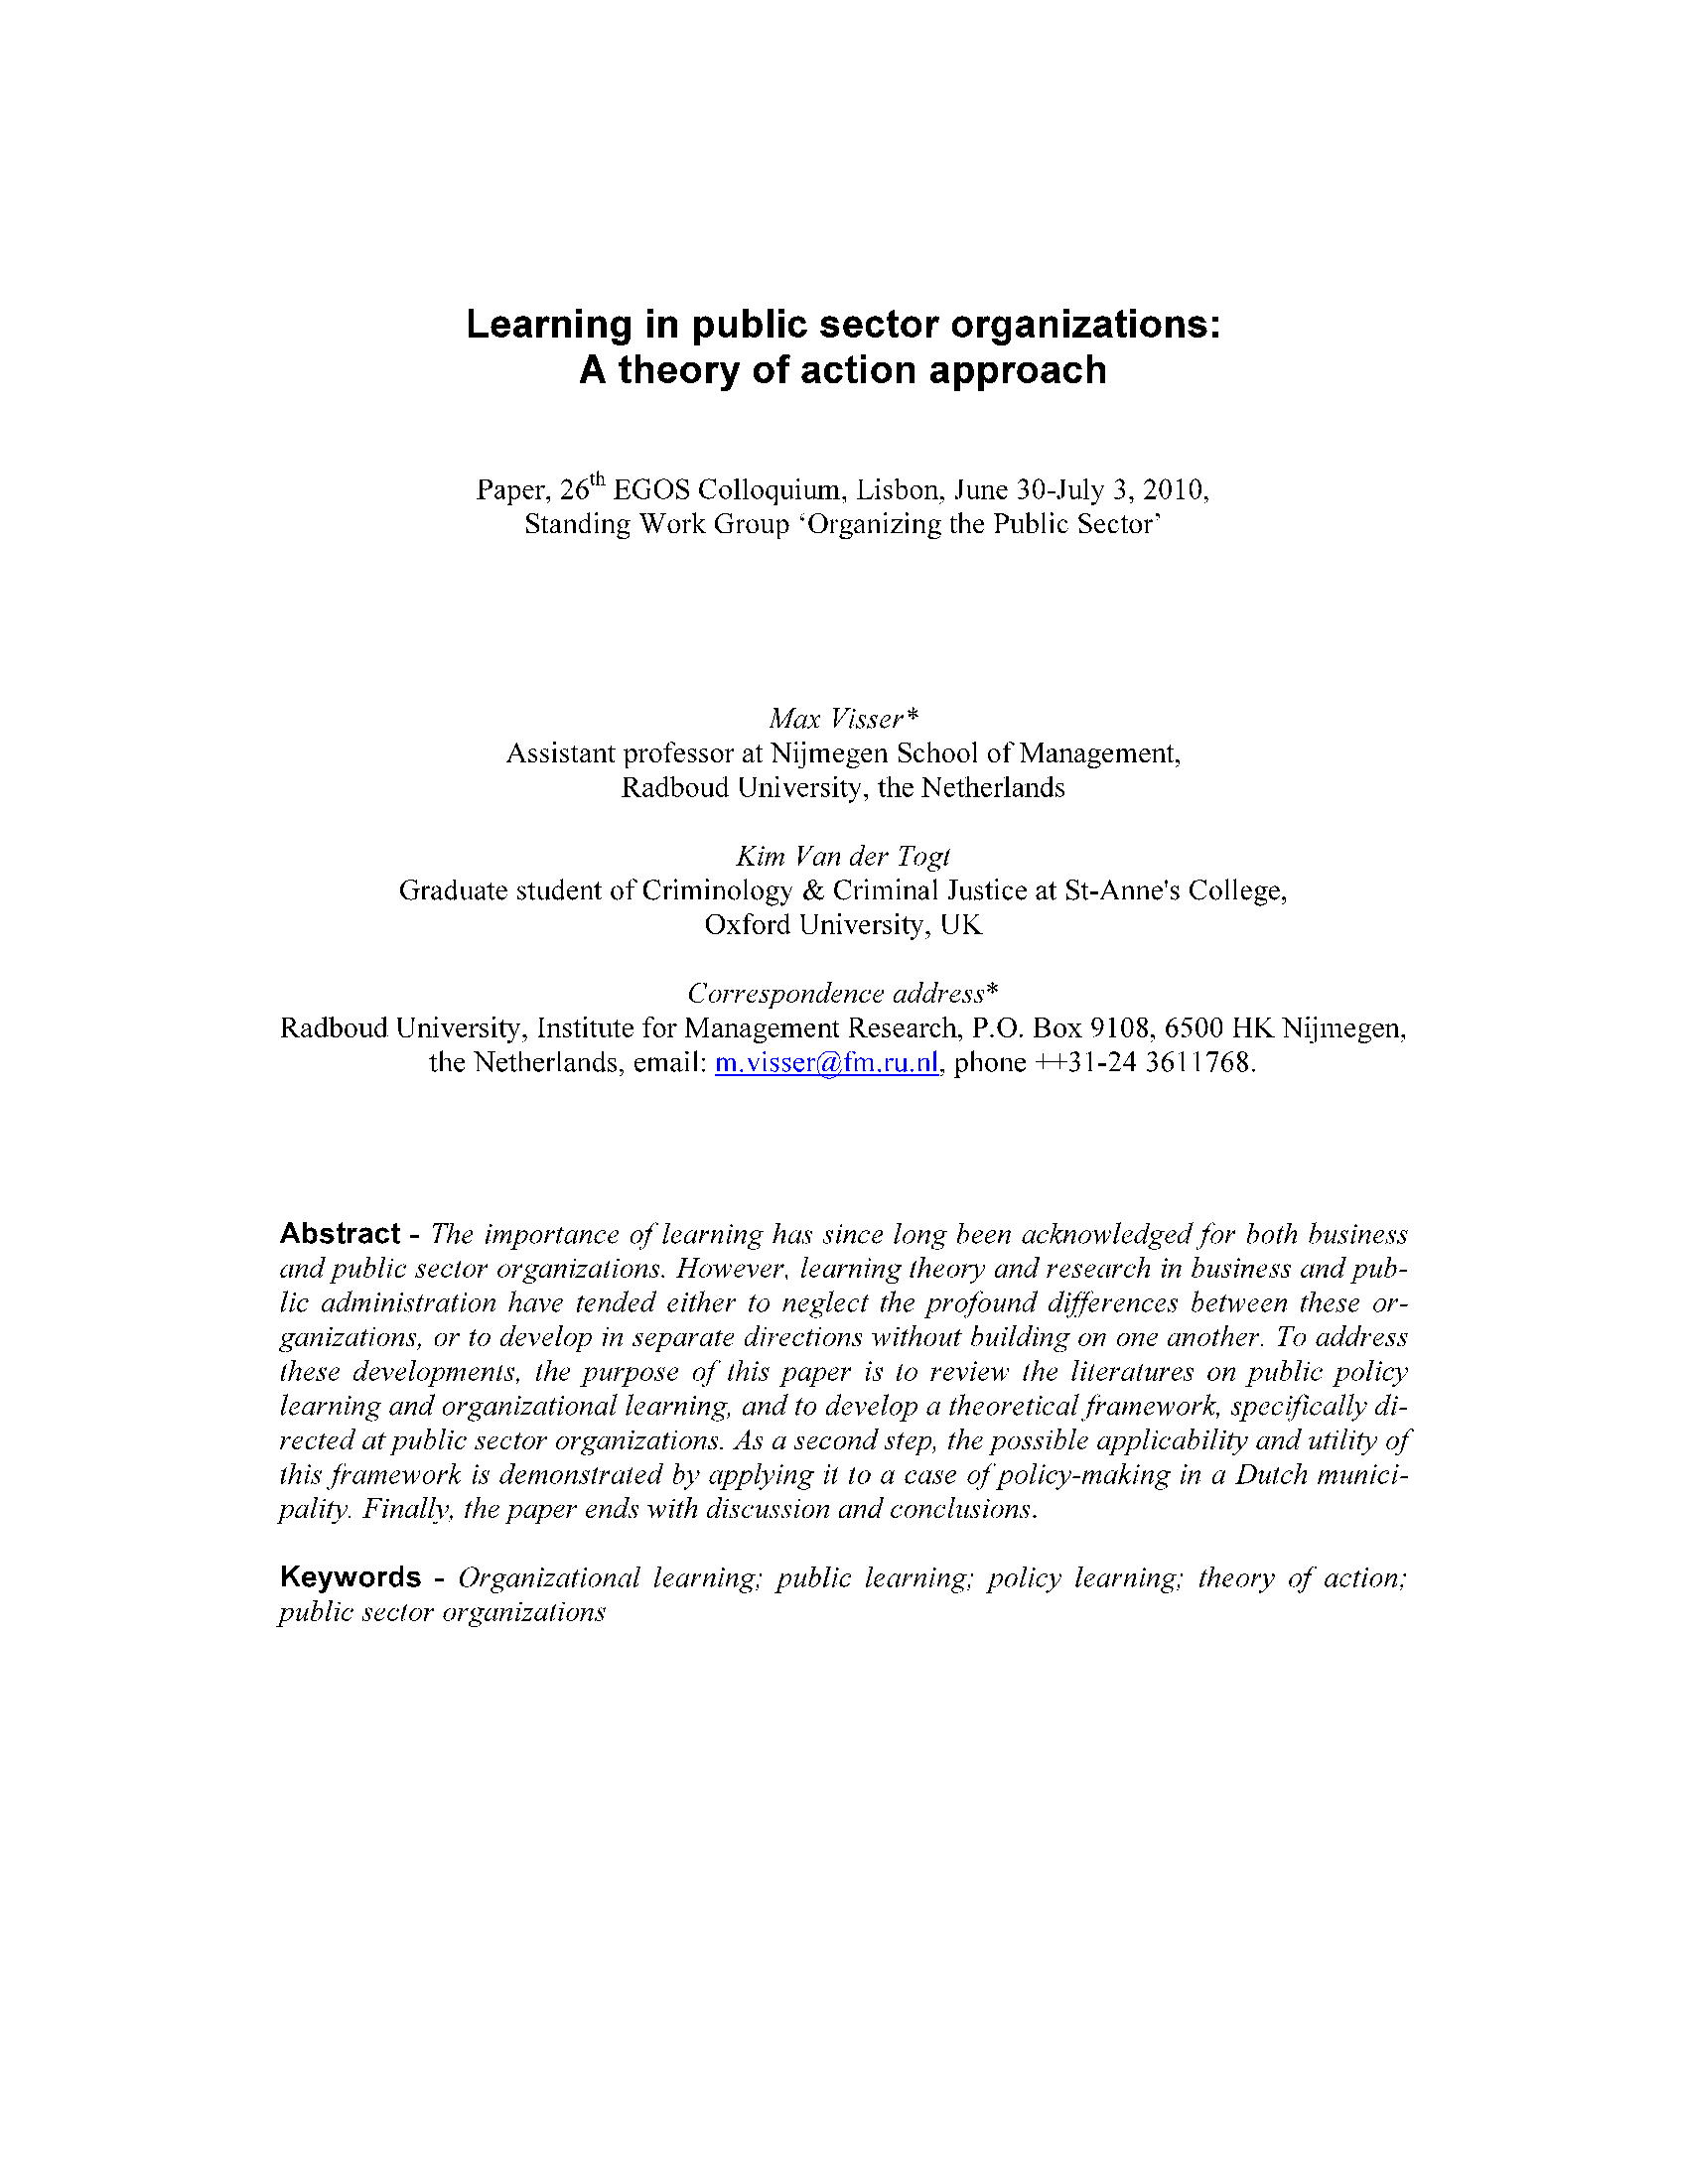 Learning in public sector organizations 19